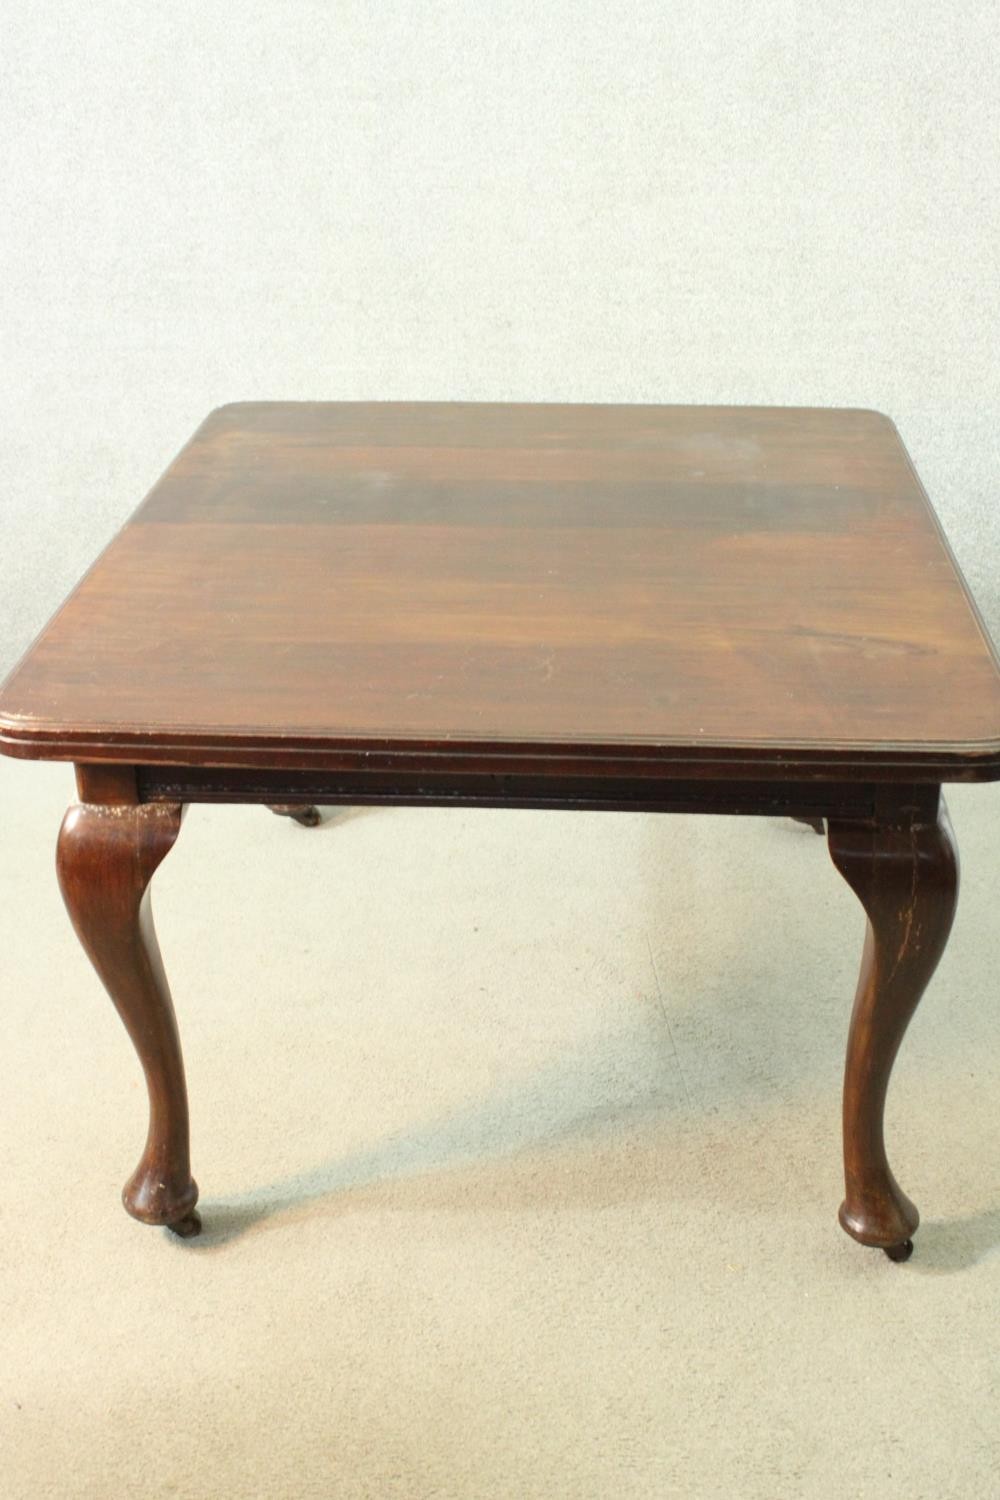 Dining table, C.1900 mahogany extending. (With winding handle but no leaf). H.71 W.125 D.105cm. - Image 3 of 6